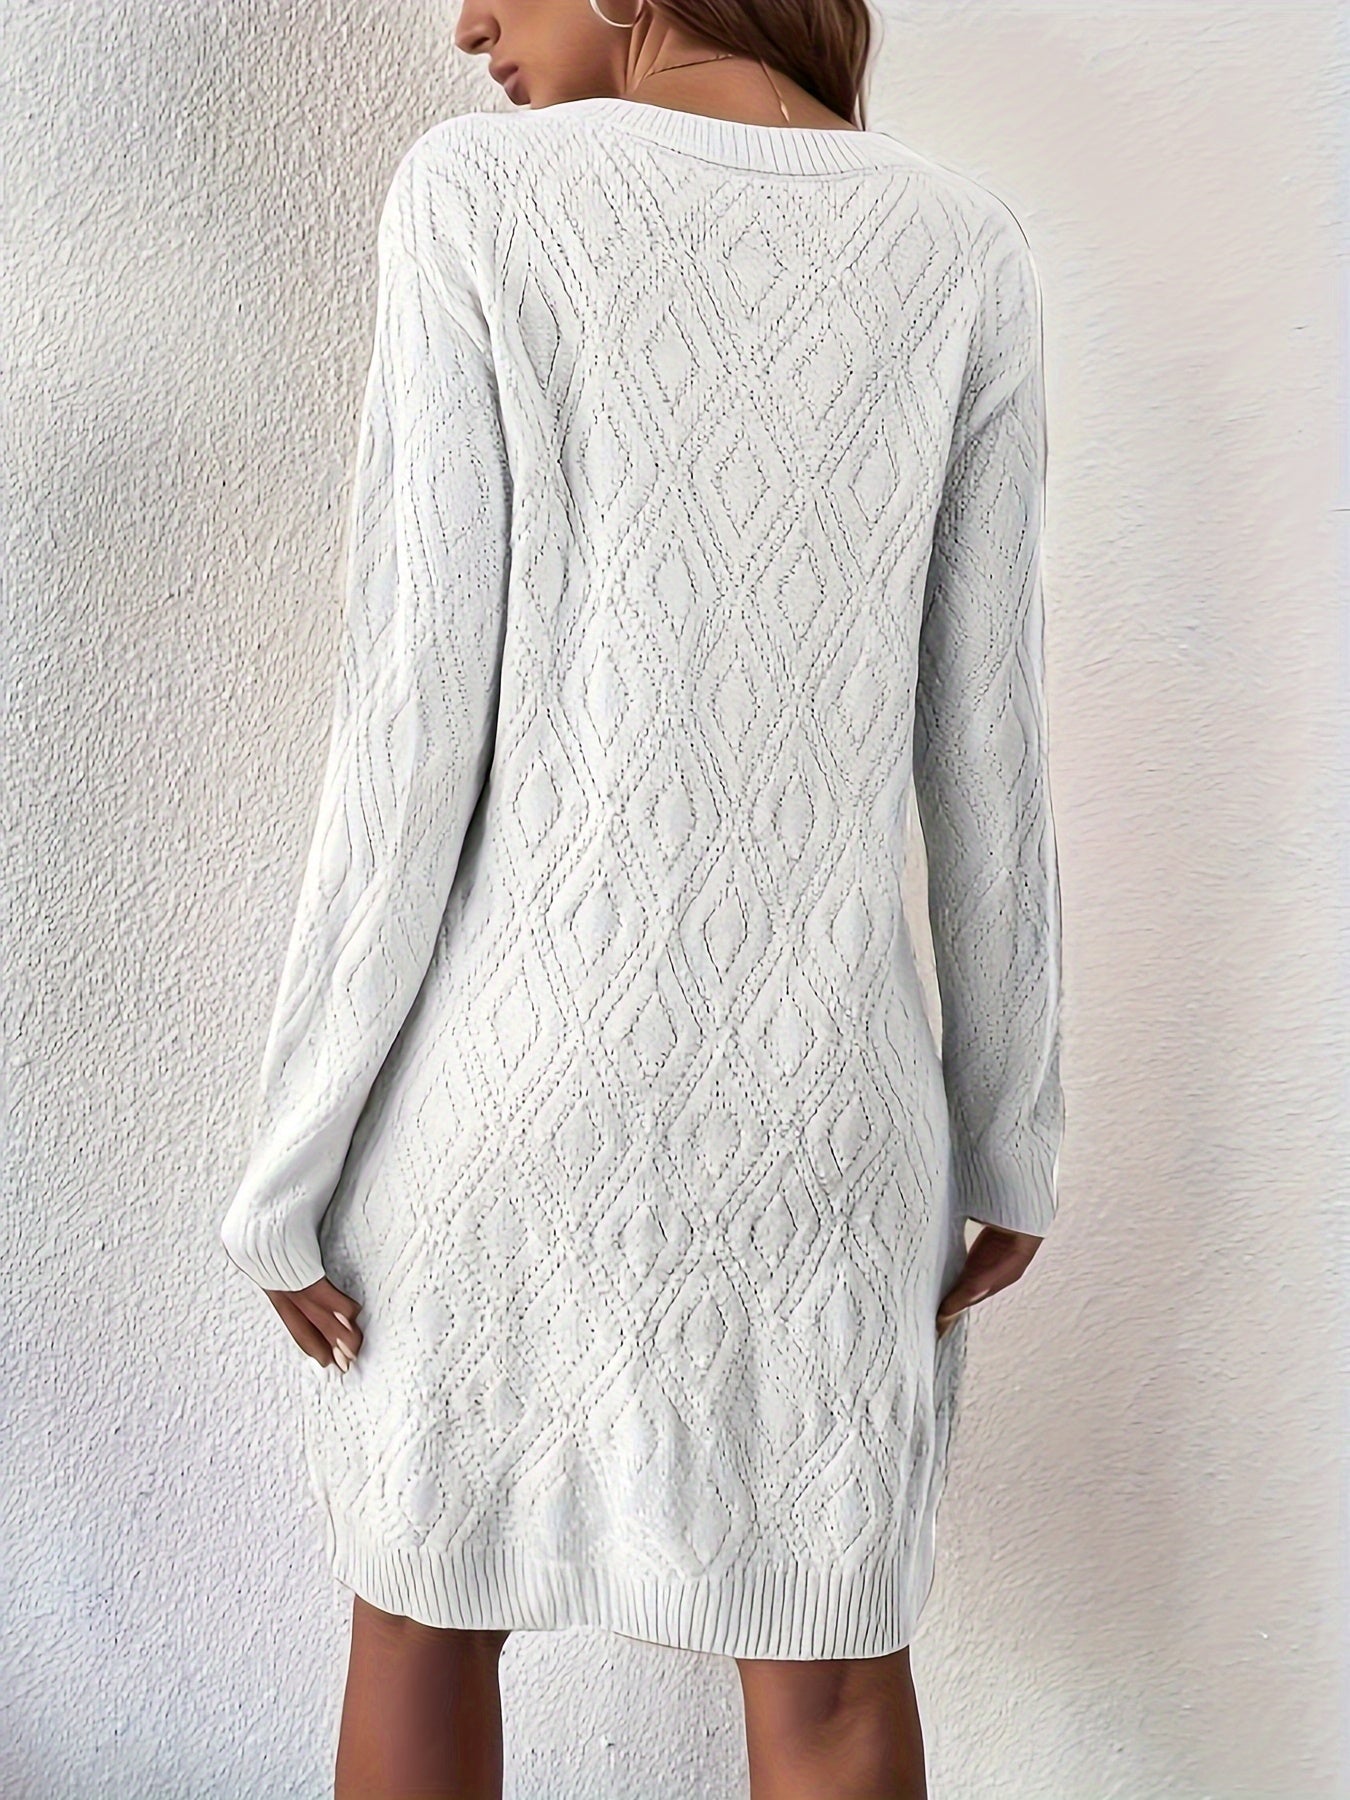 Solid Crew Neck Sweater Dress, Casual Long Sleeve Dress For Fall & Winter, Women's Clothing